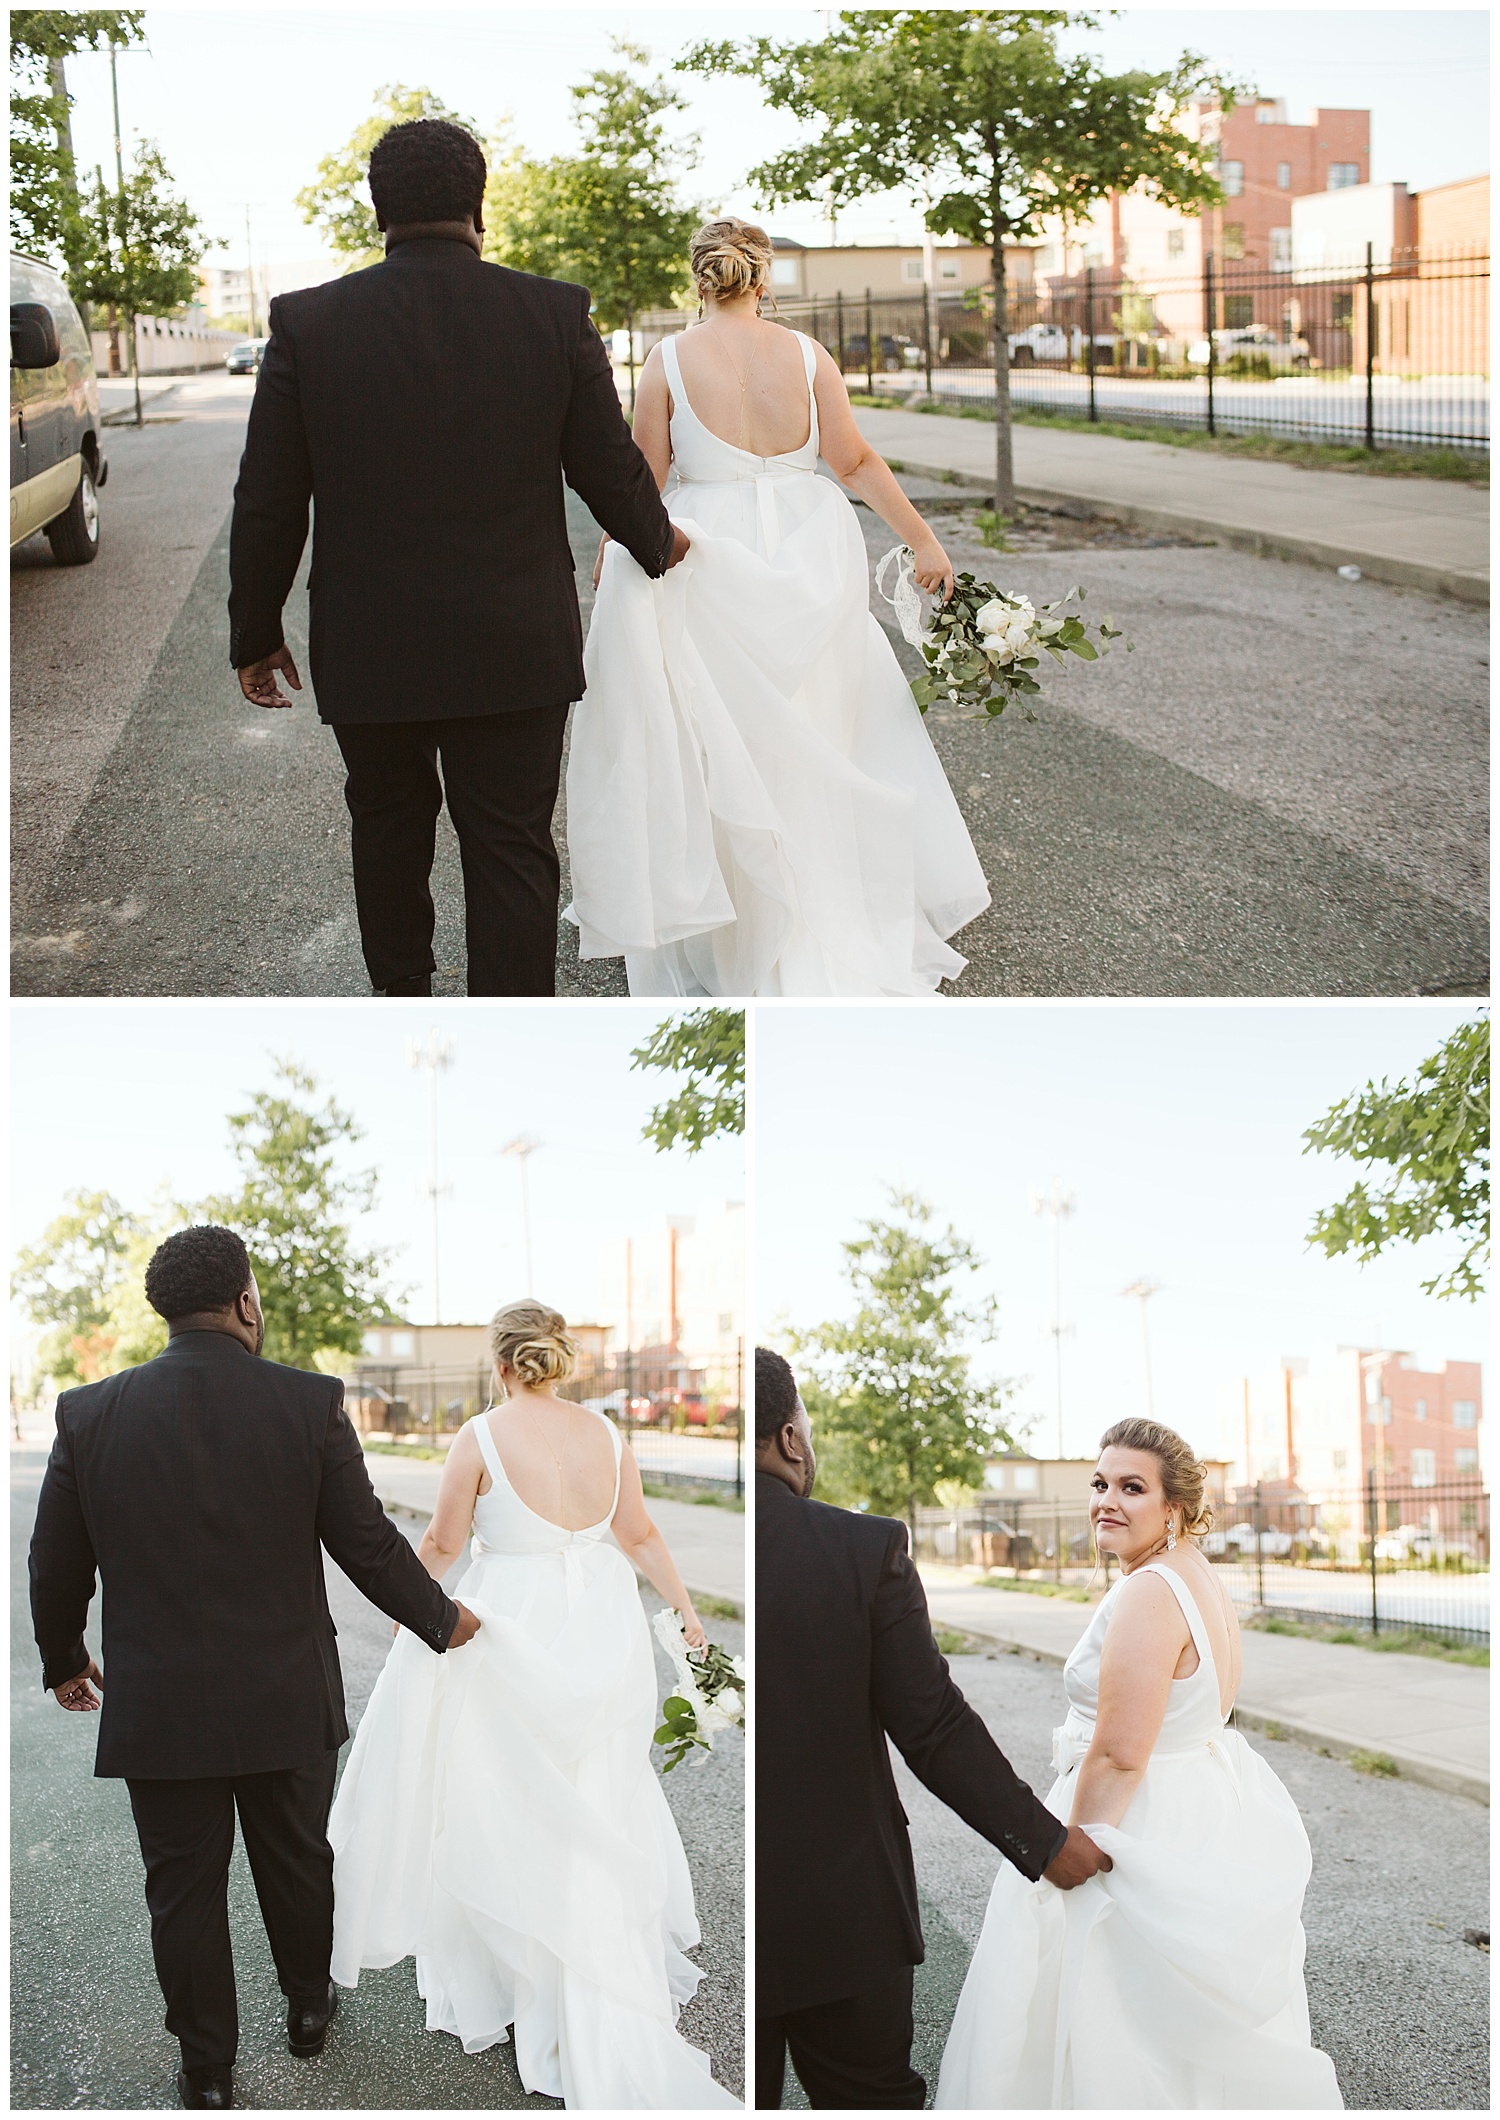 couple walking downtown Nashville in the street with back towards photographer, The Cordelle, Nashville wedding photography, Country Music Hall of Fame wedding reception, Tennessee wedding Planning, Wedding Inspiration, Engagement Inspiration, Downtown Nashville, The Cordelle Nashville, wedding venue